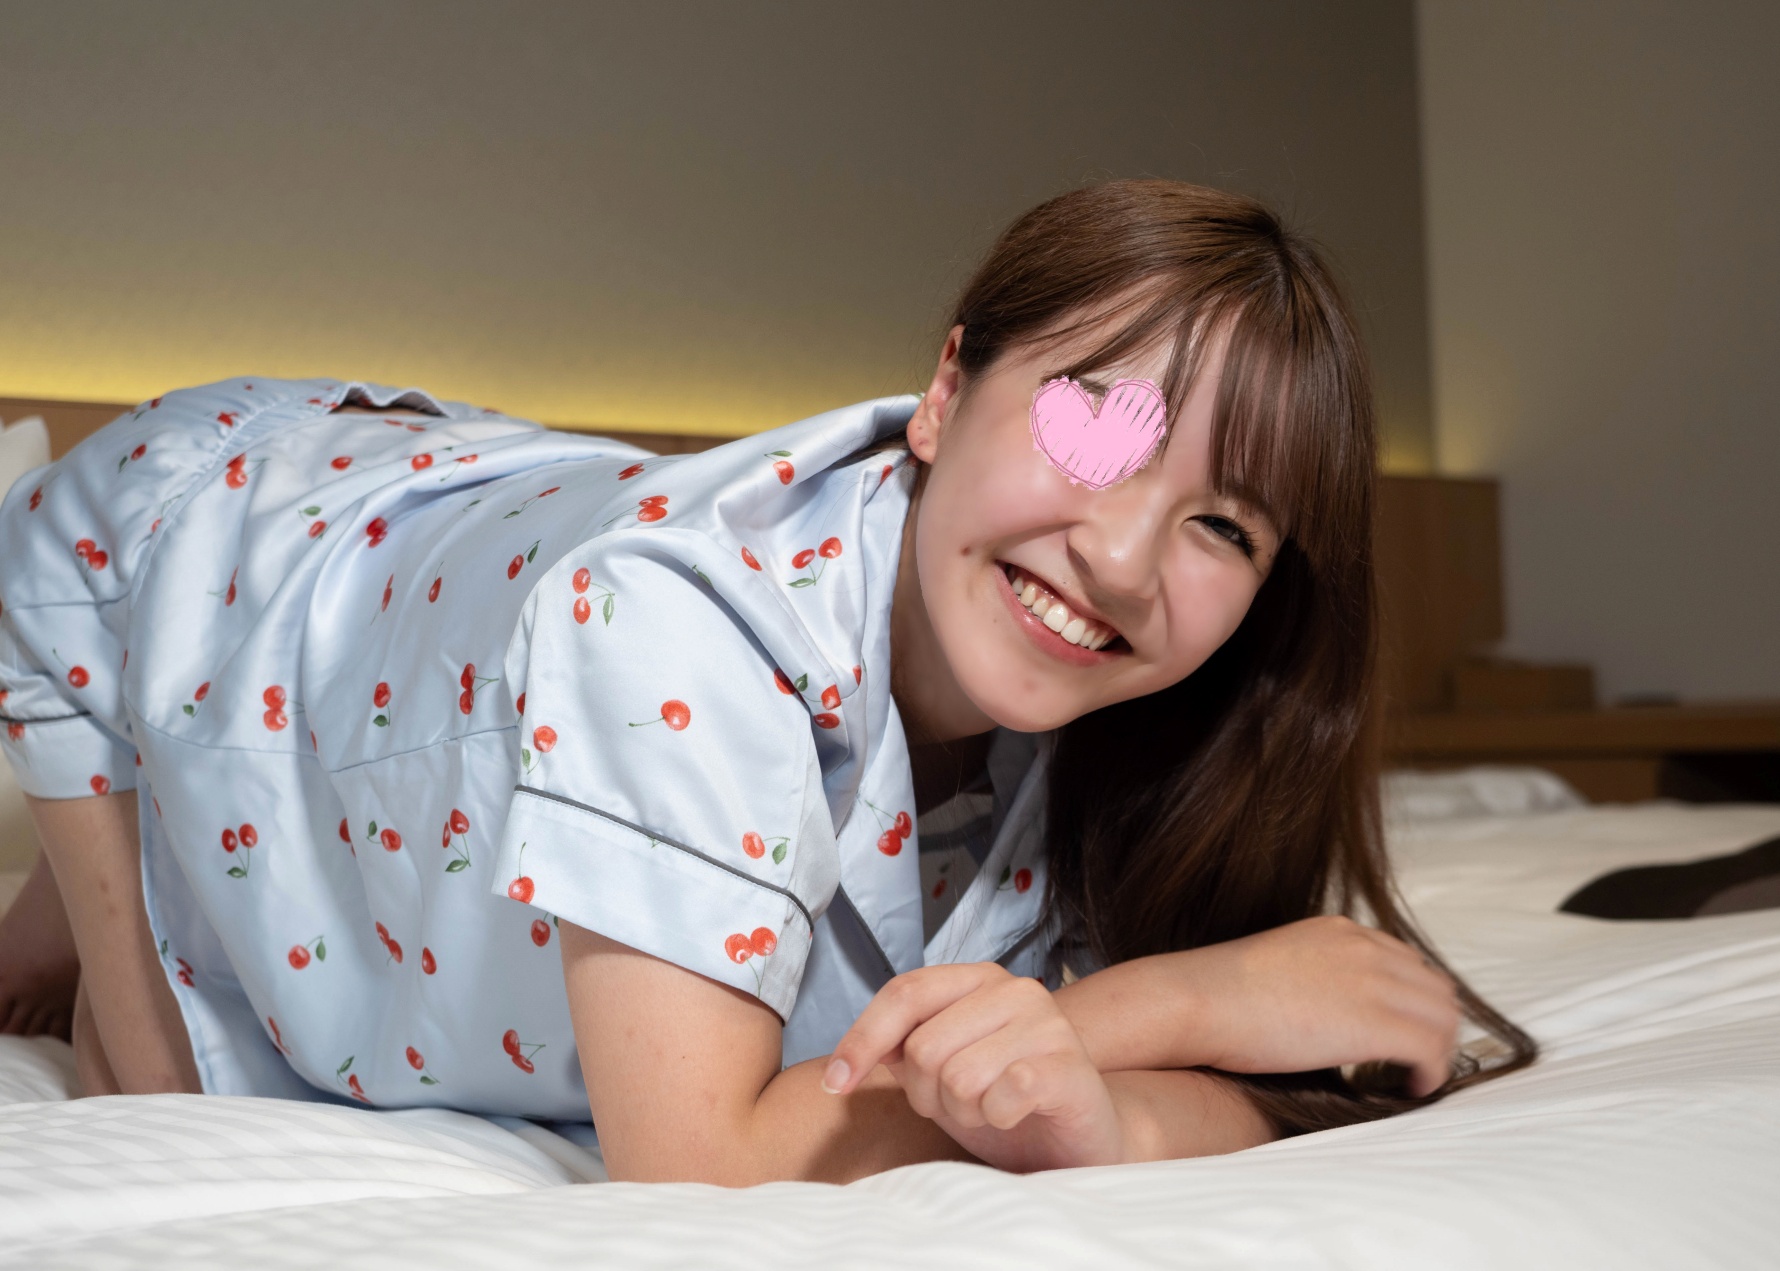 Pajama Monashi snonqyzj Pajama de Ojama I cant stop pushing Ai-chan 19 years old has a bright personality and a super cute smile I cant resist the reaction of a serious amateur with natural pubic hair